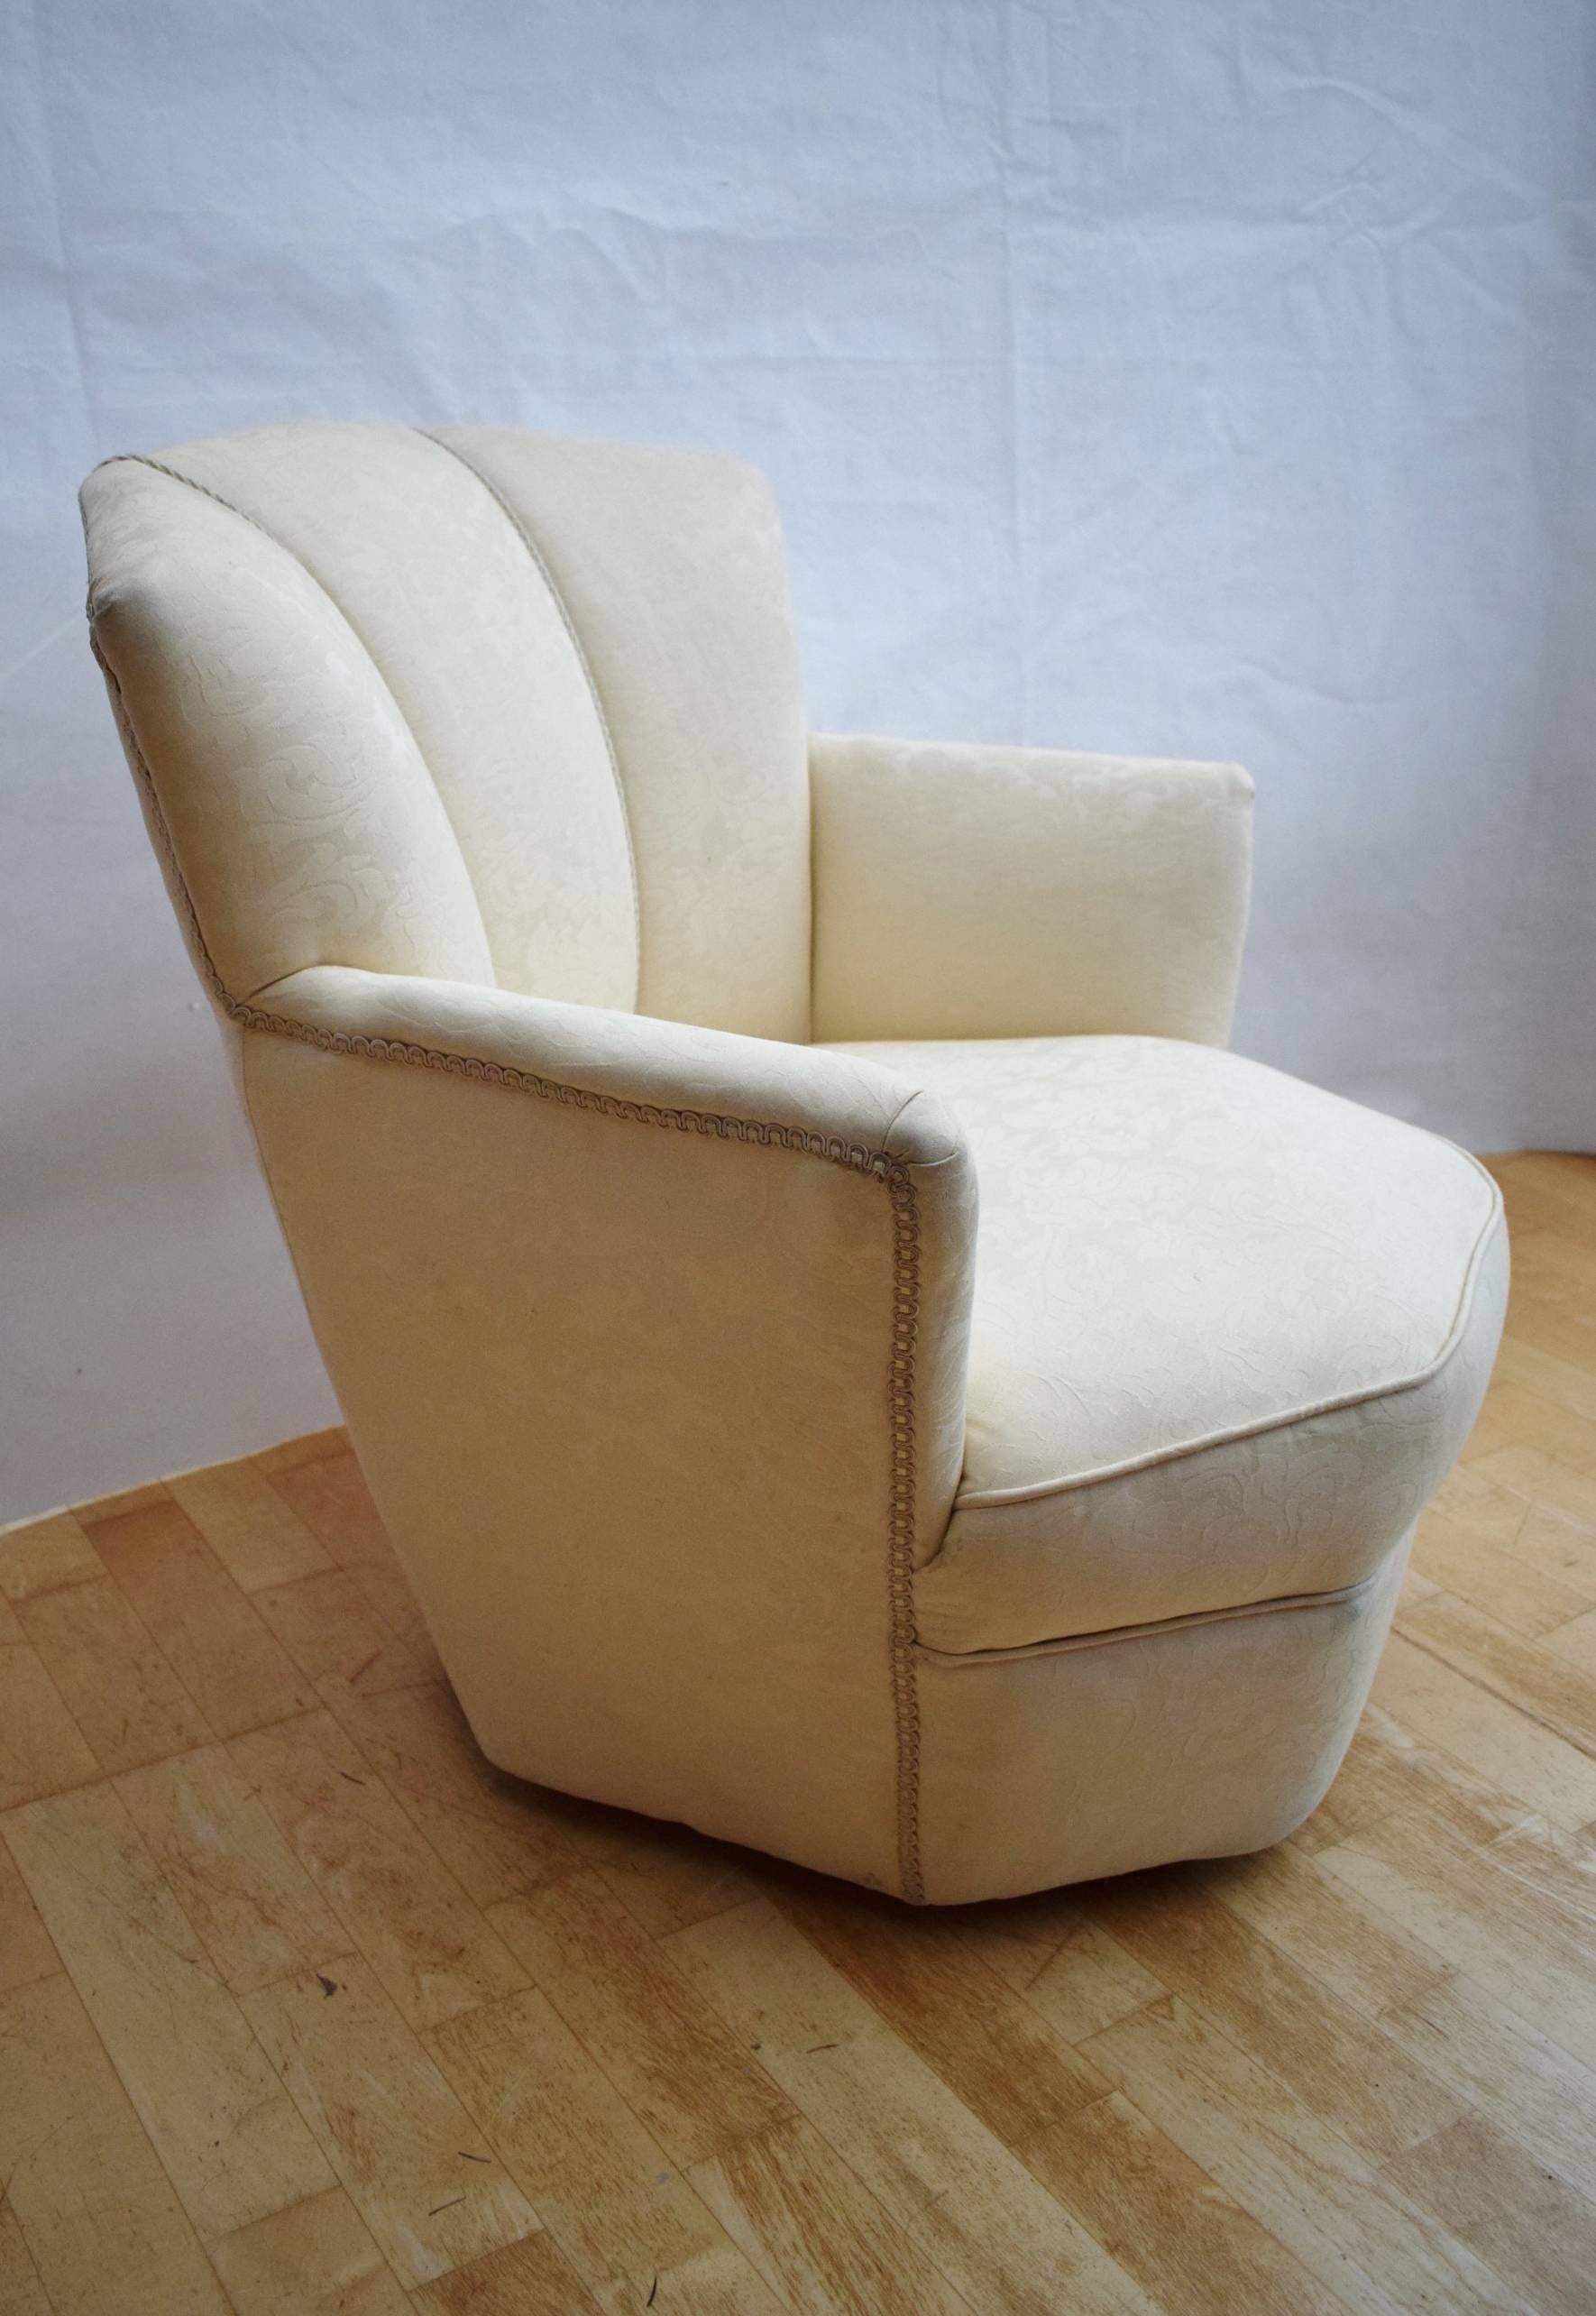 Curved and moulded back with inset braid detailing.

Fixed sprung and padded seat base with pipping to front.

​Raised upon small chrome supports to the base.

Overall condition is excellent with no rips or tears to the upholstery.

​However